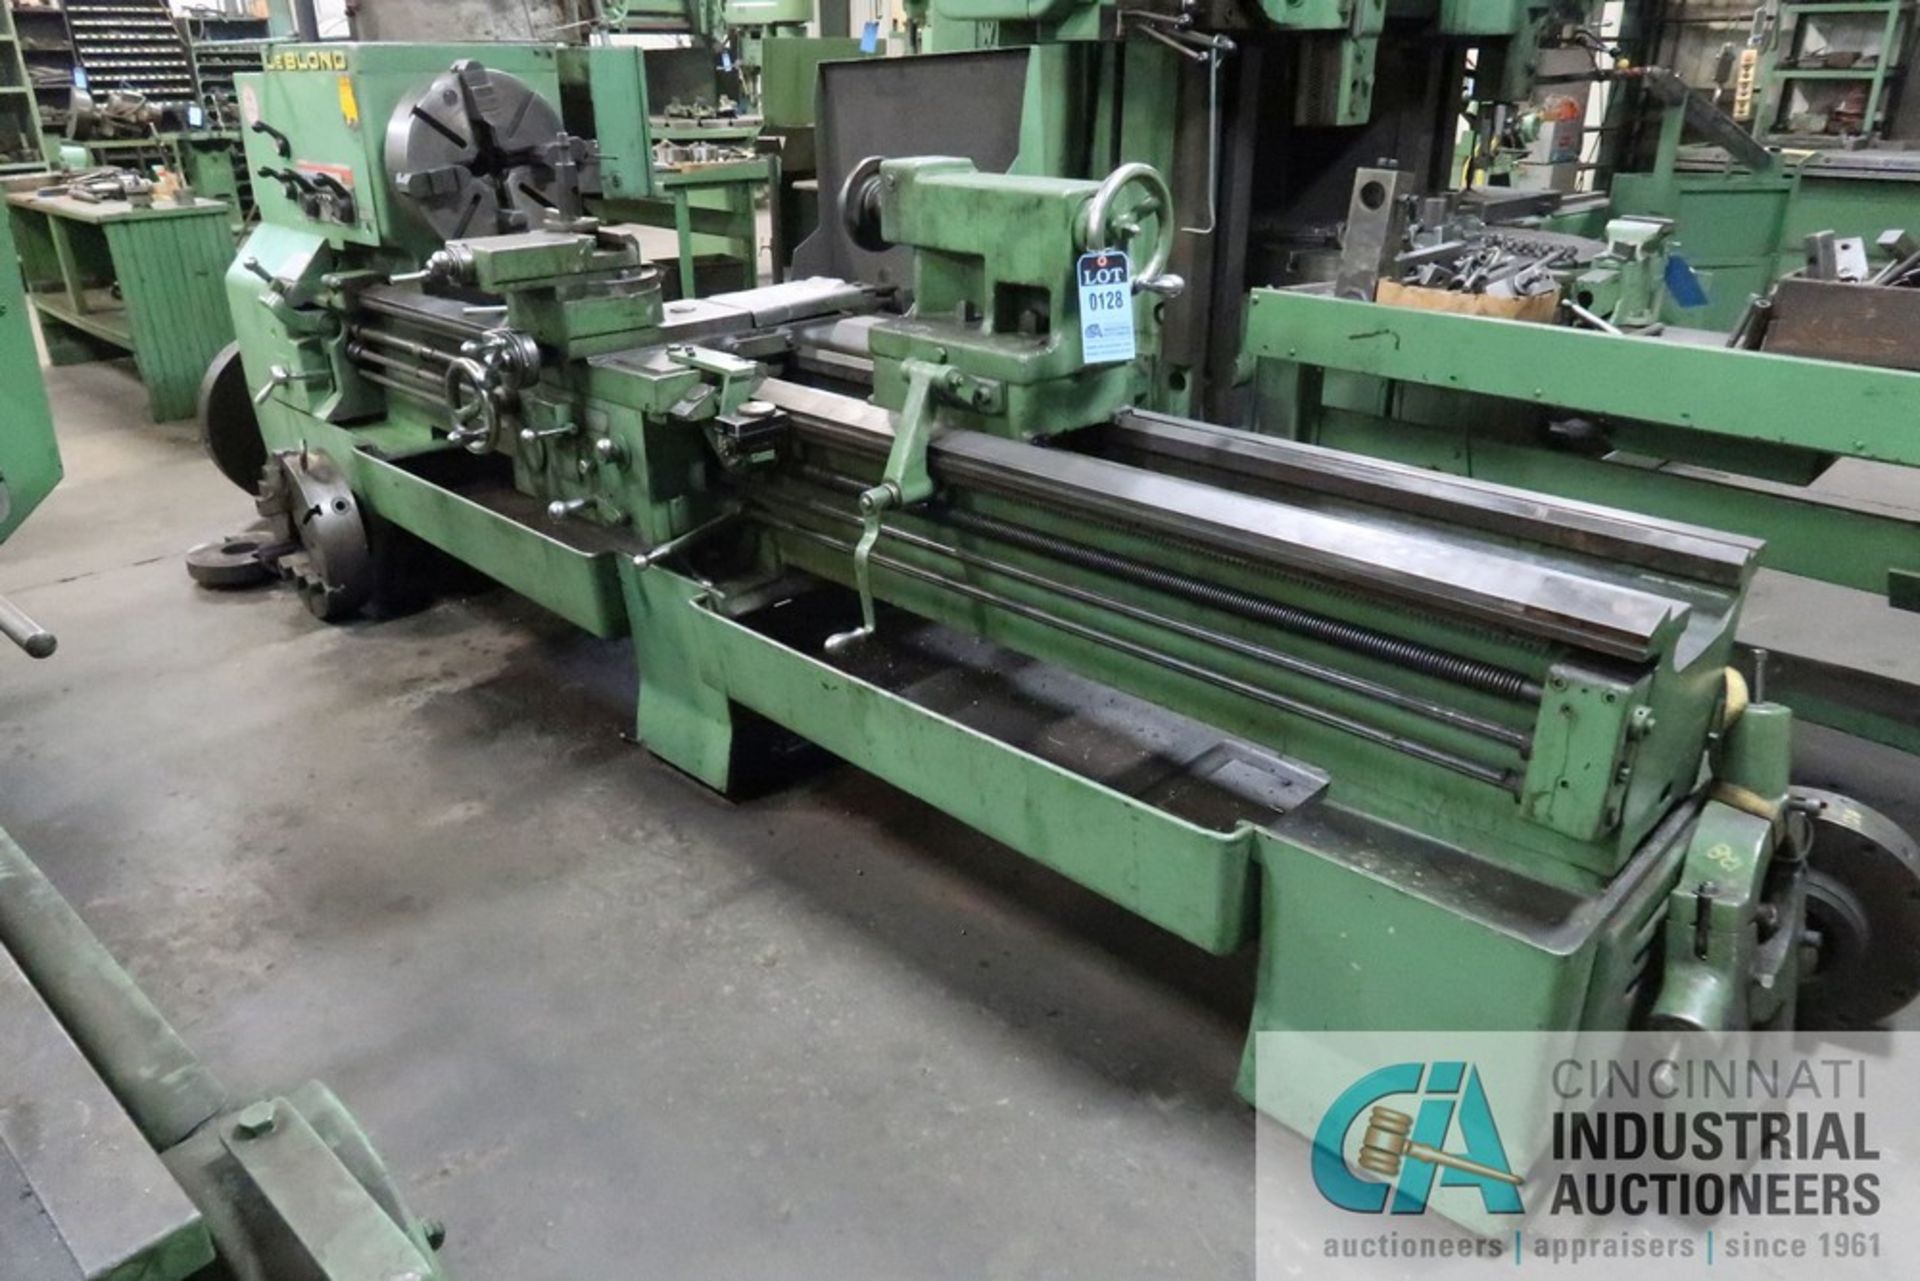 26" X 96" LEBLOND ENGINE LATHE; S/N 5H-555, 2" SPINDLE HOLE, 18" 4-JAW CHUCK, TAPER ATTACHMENT,